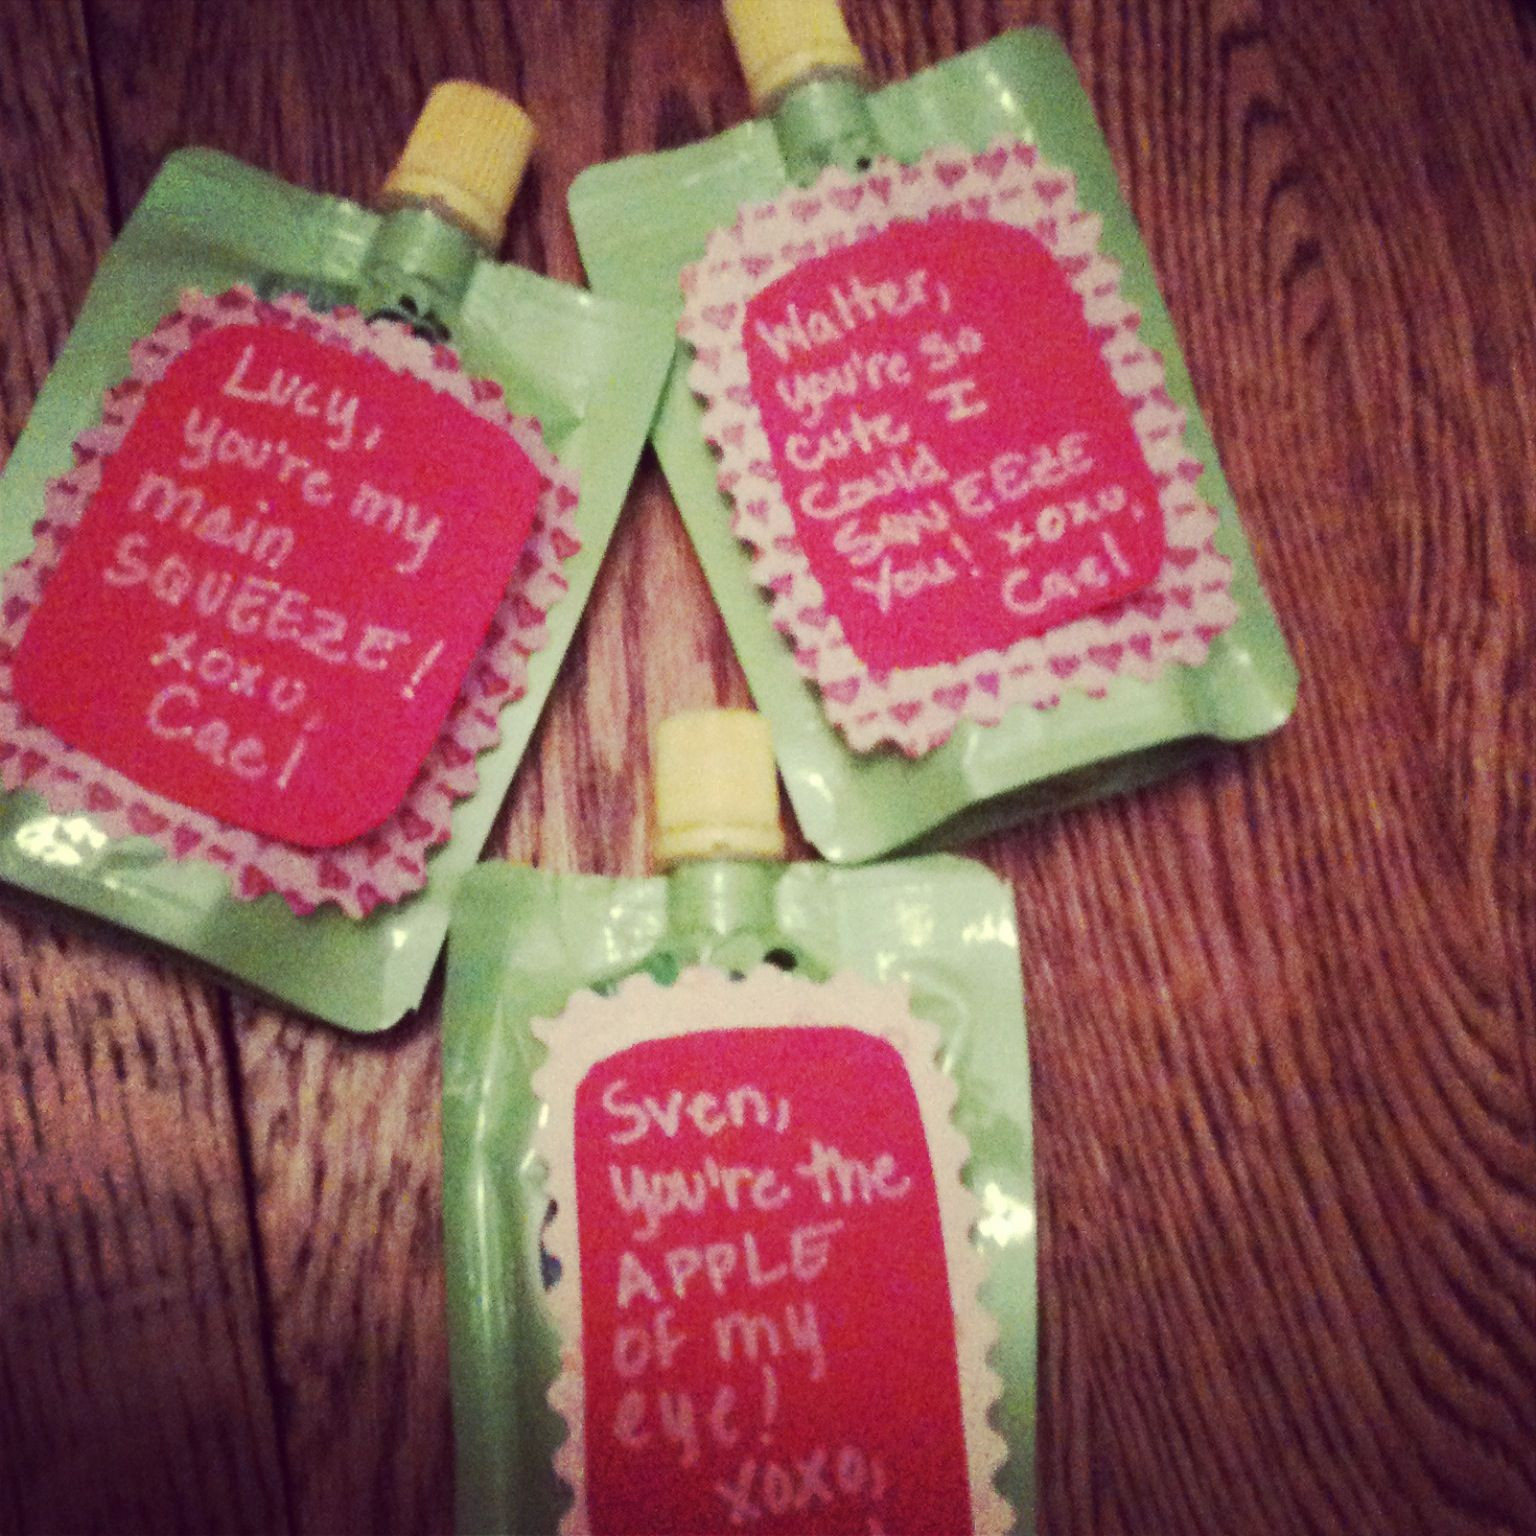 Valentine Gift Ideas For Infants
 Infant valentines on applesauce pouches